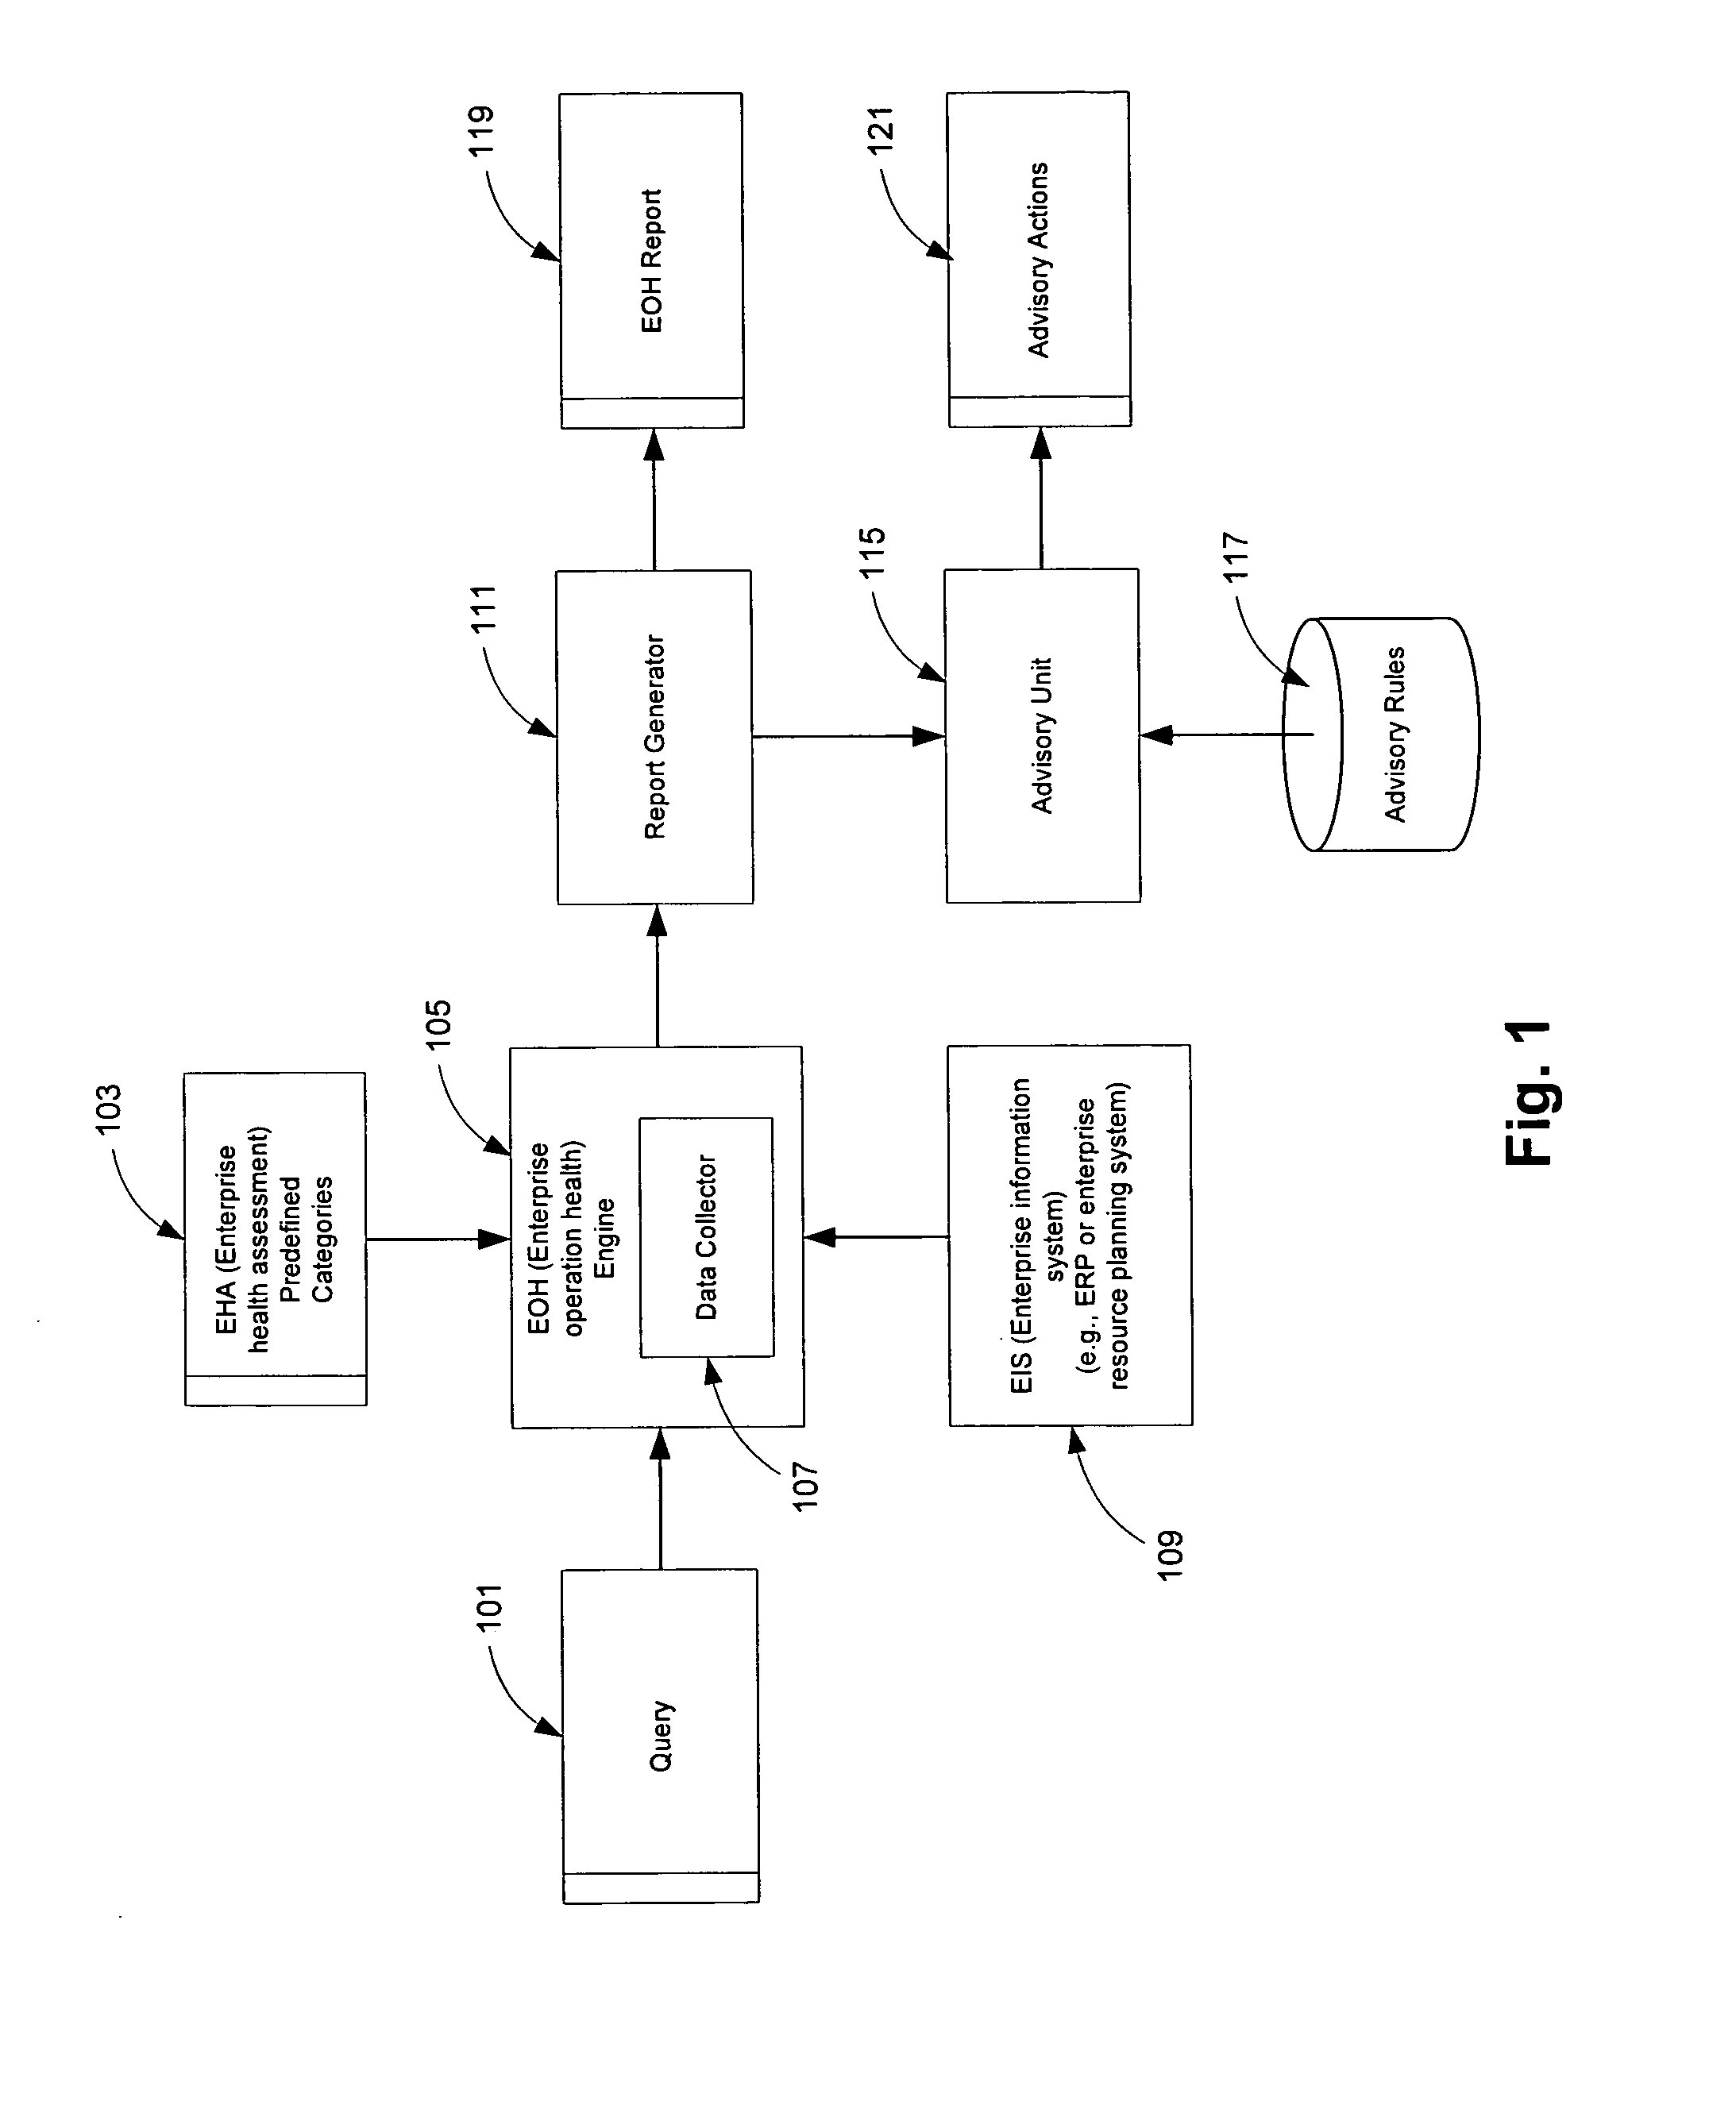 Method and apparatus for enterprise operation assessment